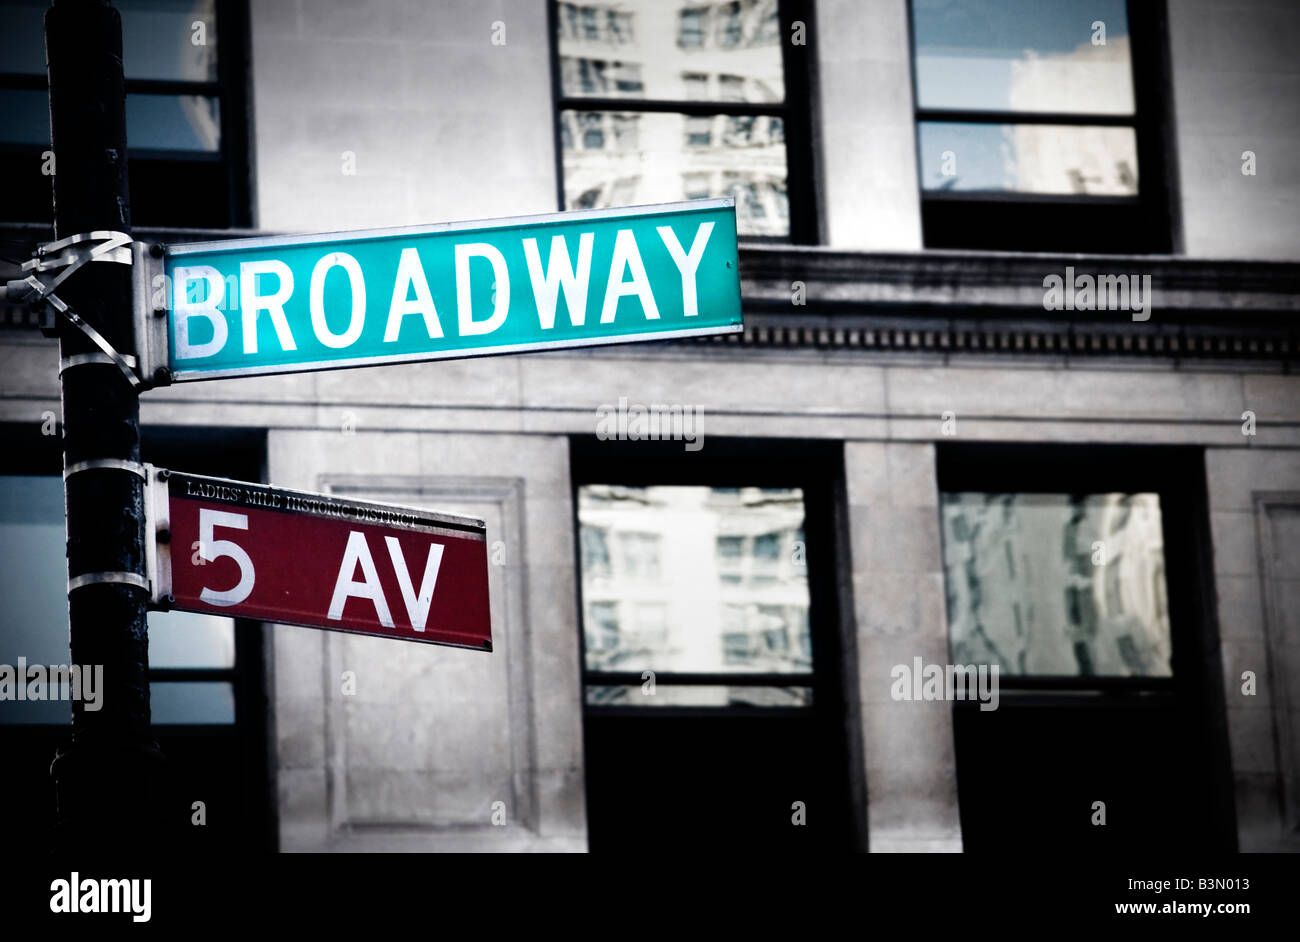 Broadway sign in New York City with grungy high contrast coloring Stock Photo